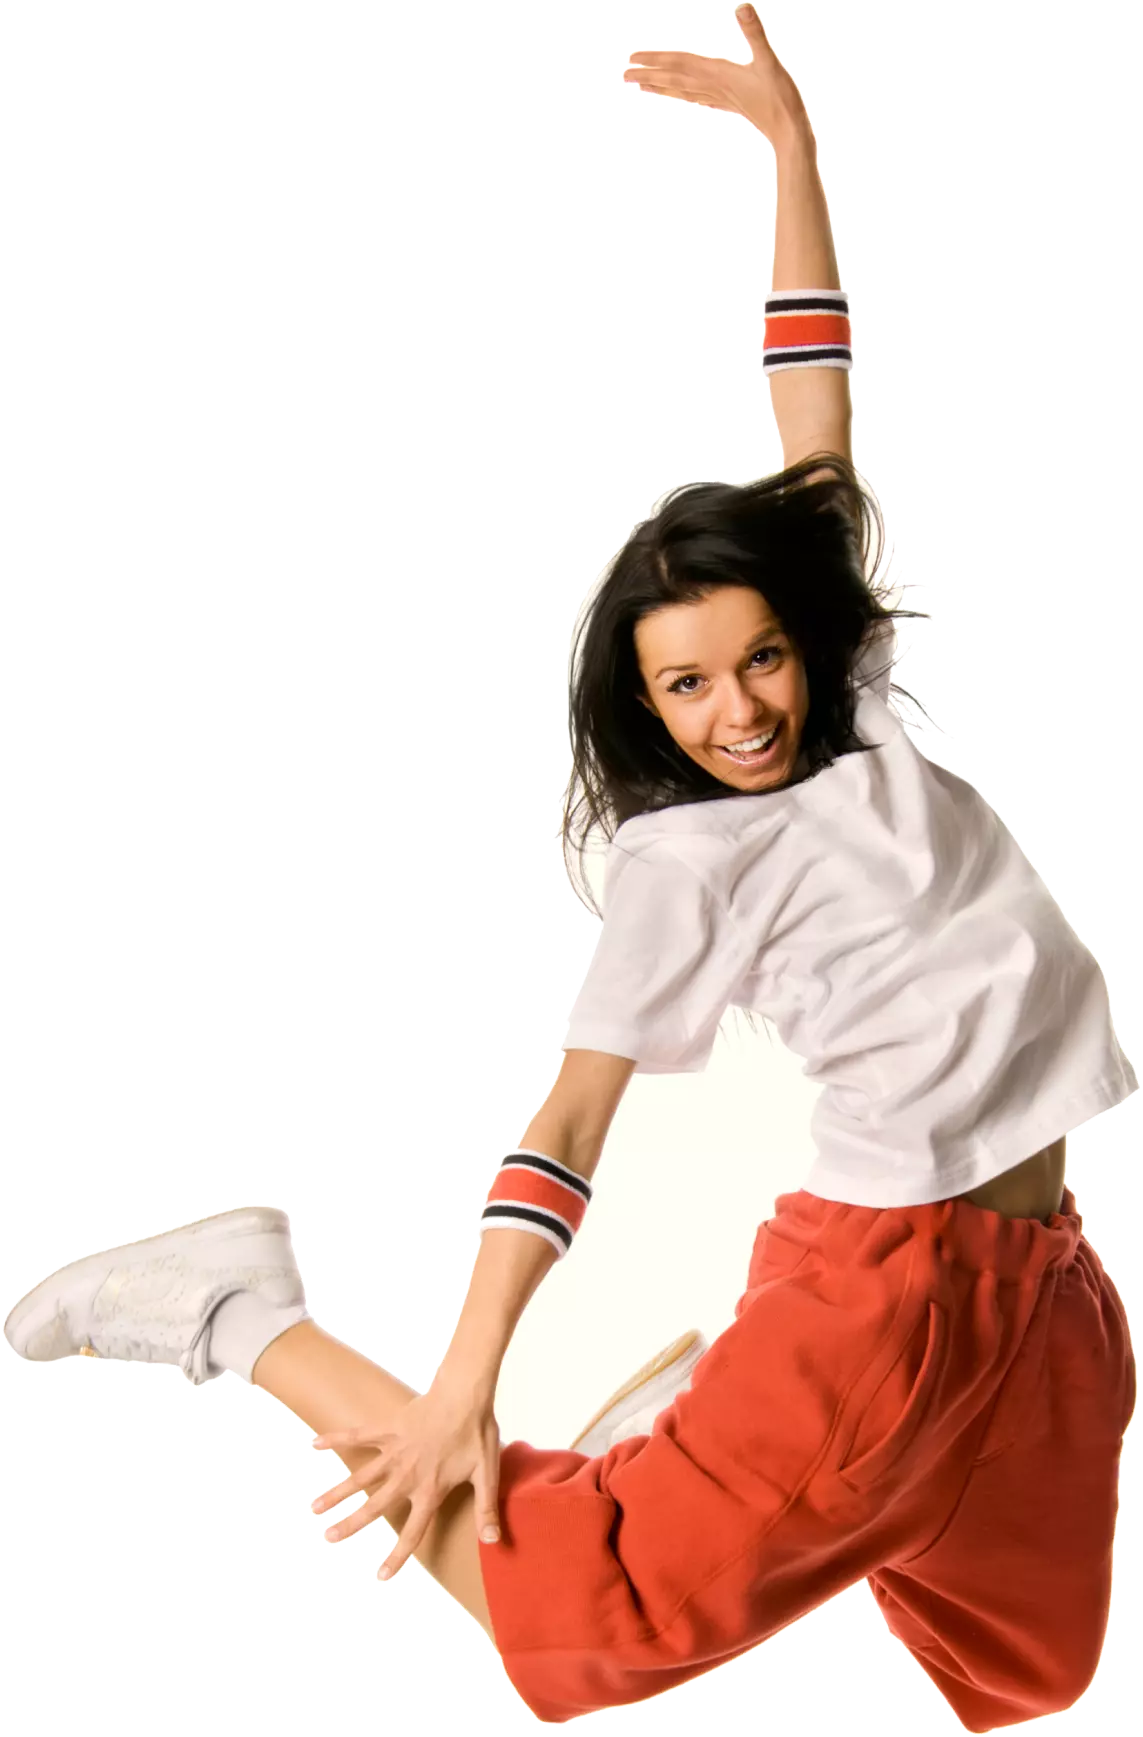 a girl with dark hair is dancing